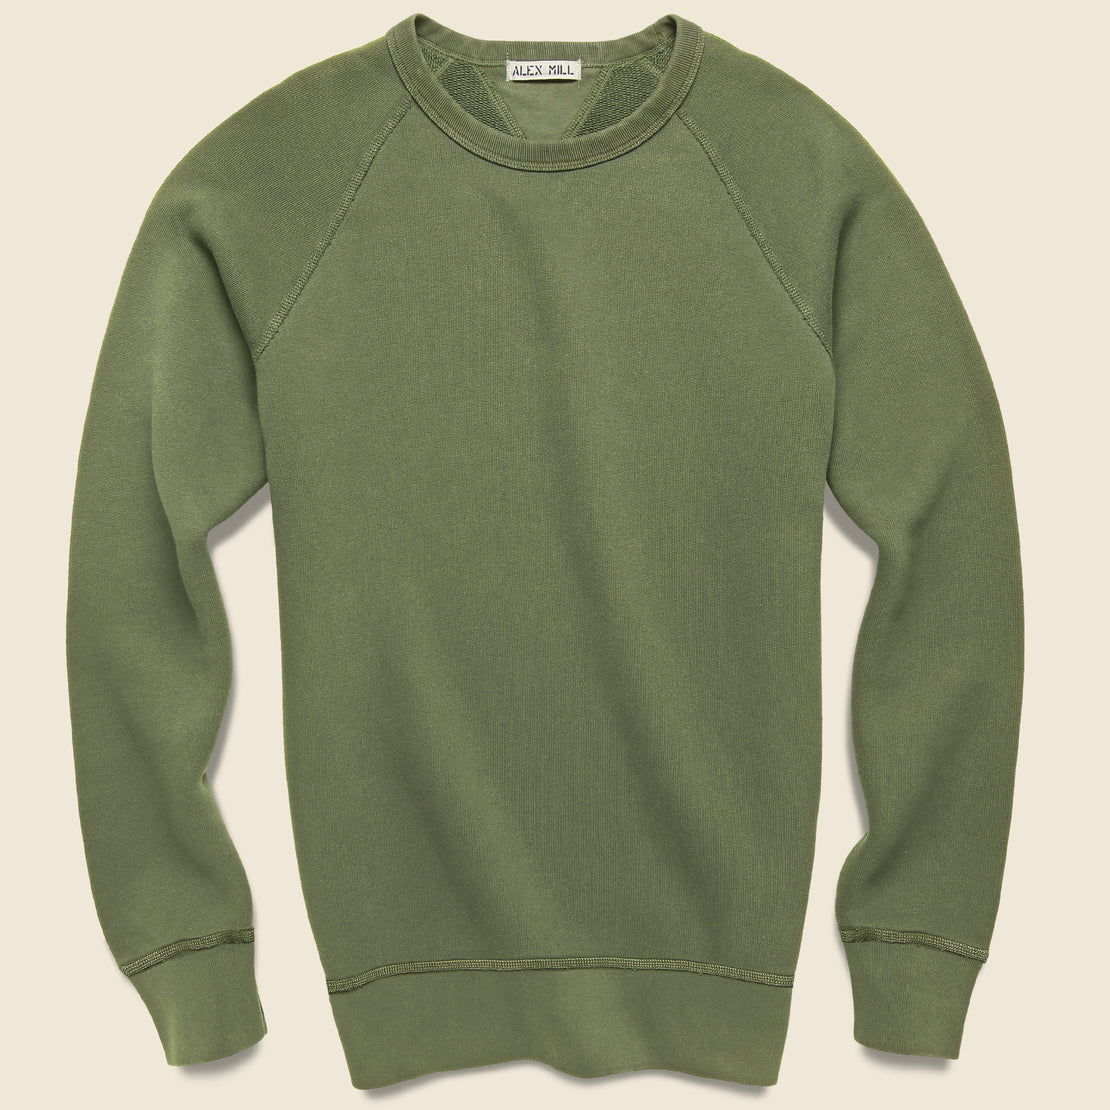 Alex Mill French Terry Sweatshirt - Faded Olive